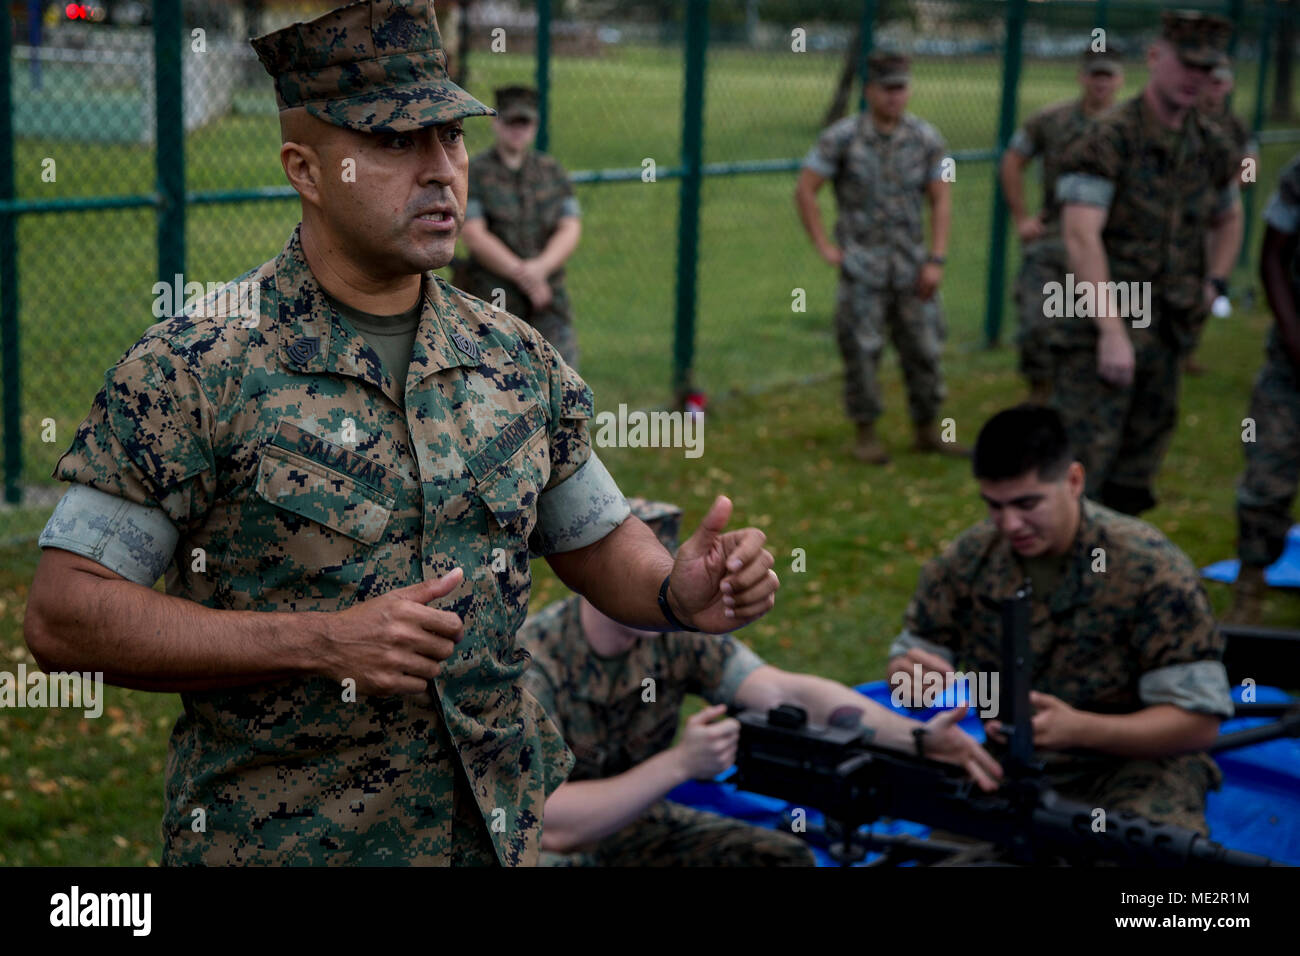 U.S. Marine Corps 1st Sgt. Alvaro Salazar, first sergeant, Service Company, Headquarters Battalion, Marine Corps Base Hawaii, speaks during a professional military education (PME) event, Dec. 8, 2017. The PME focused on crew-served weapons, radio operating procedures, and medical care techniques to sustain military skills and produce readiness. (U.S. Marine Corps Photo by Sgt. Alex Kouns) Stock Photo